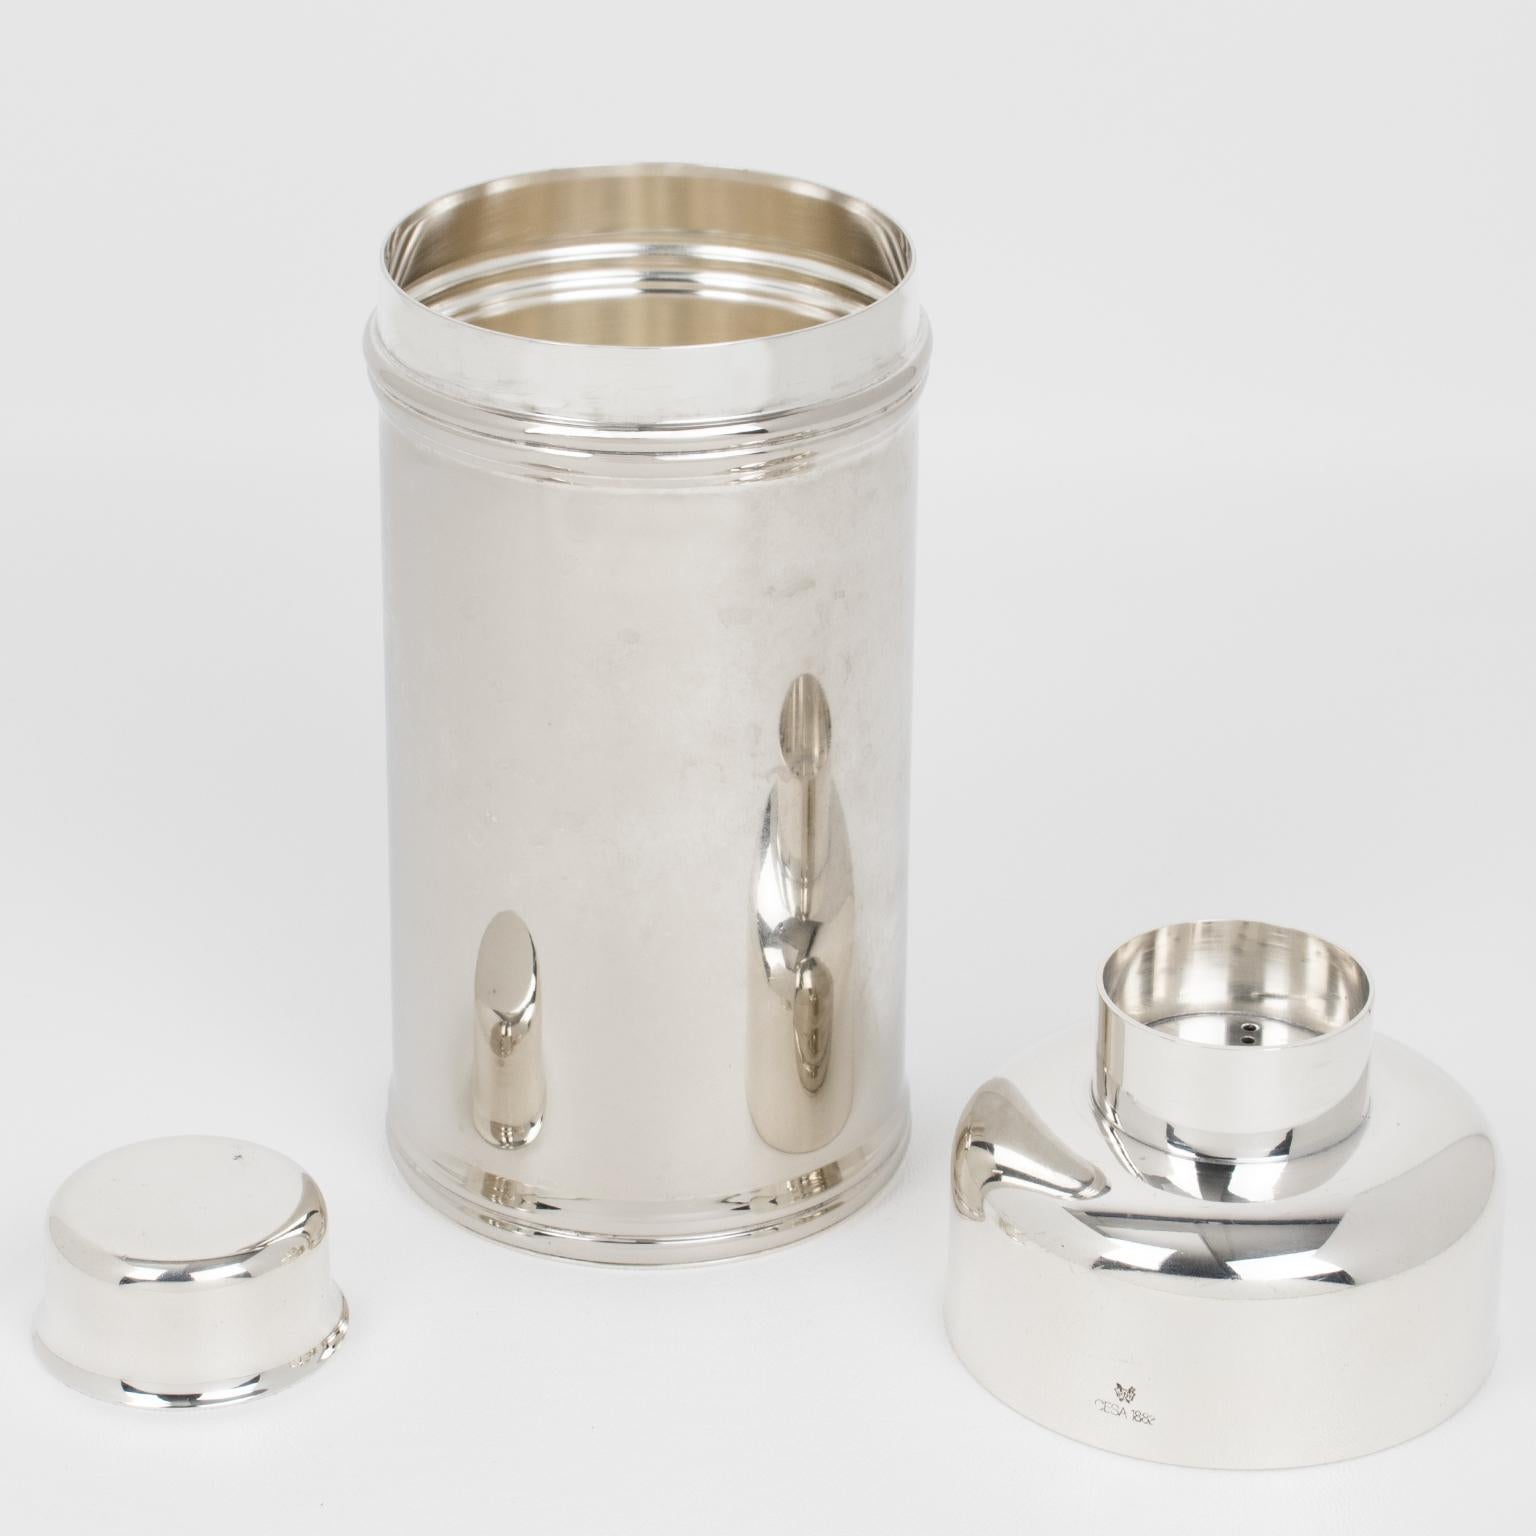 This modernist three-sectioned cocktail shaker was crafted by the renowned silversmith Cesa 1882 in Italy in the 1960s. The beautiful modernist design features a geometric pattern and is adorned with a removable cap and strainer. The side is marked